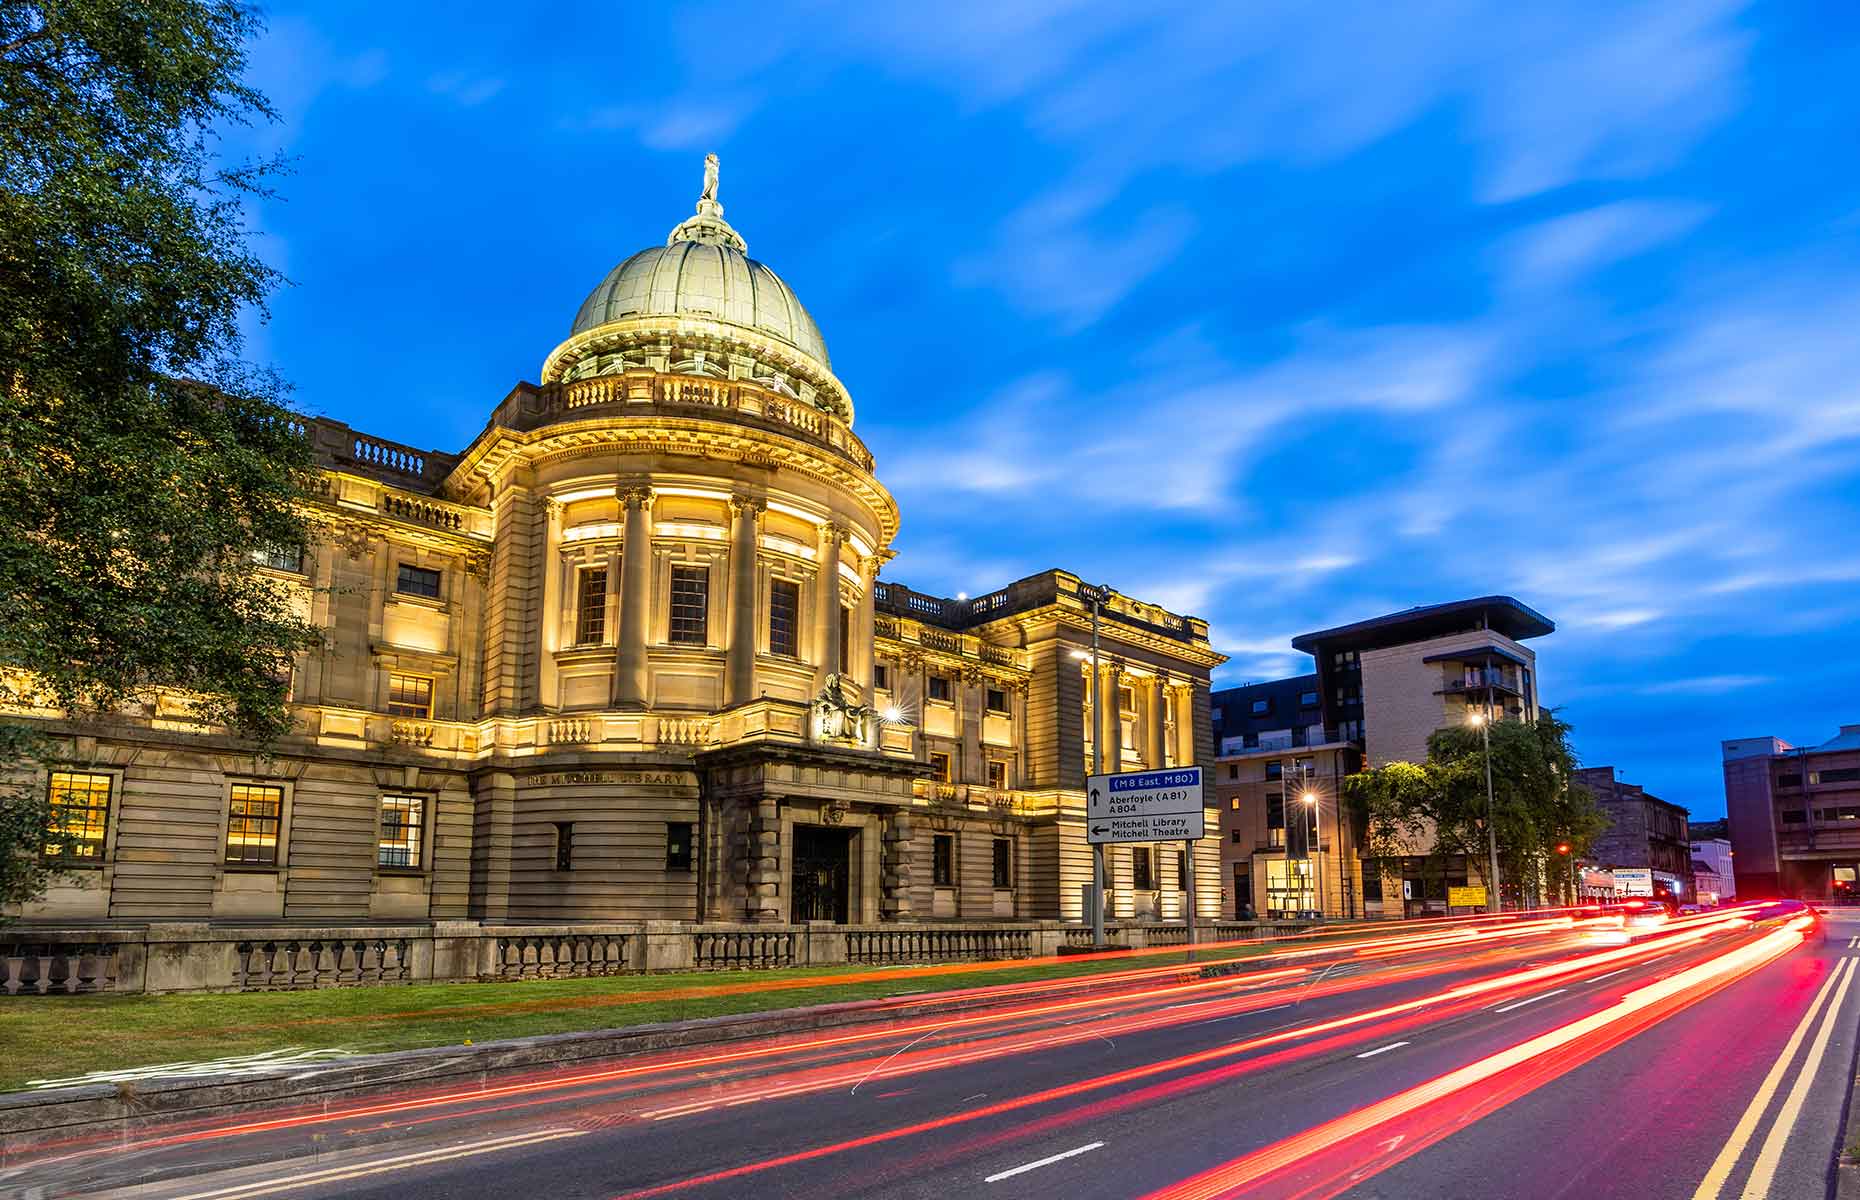 Mitchell Library (Image credit: vichie81/Shutterstock)